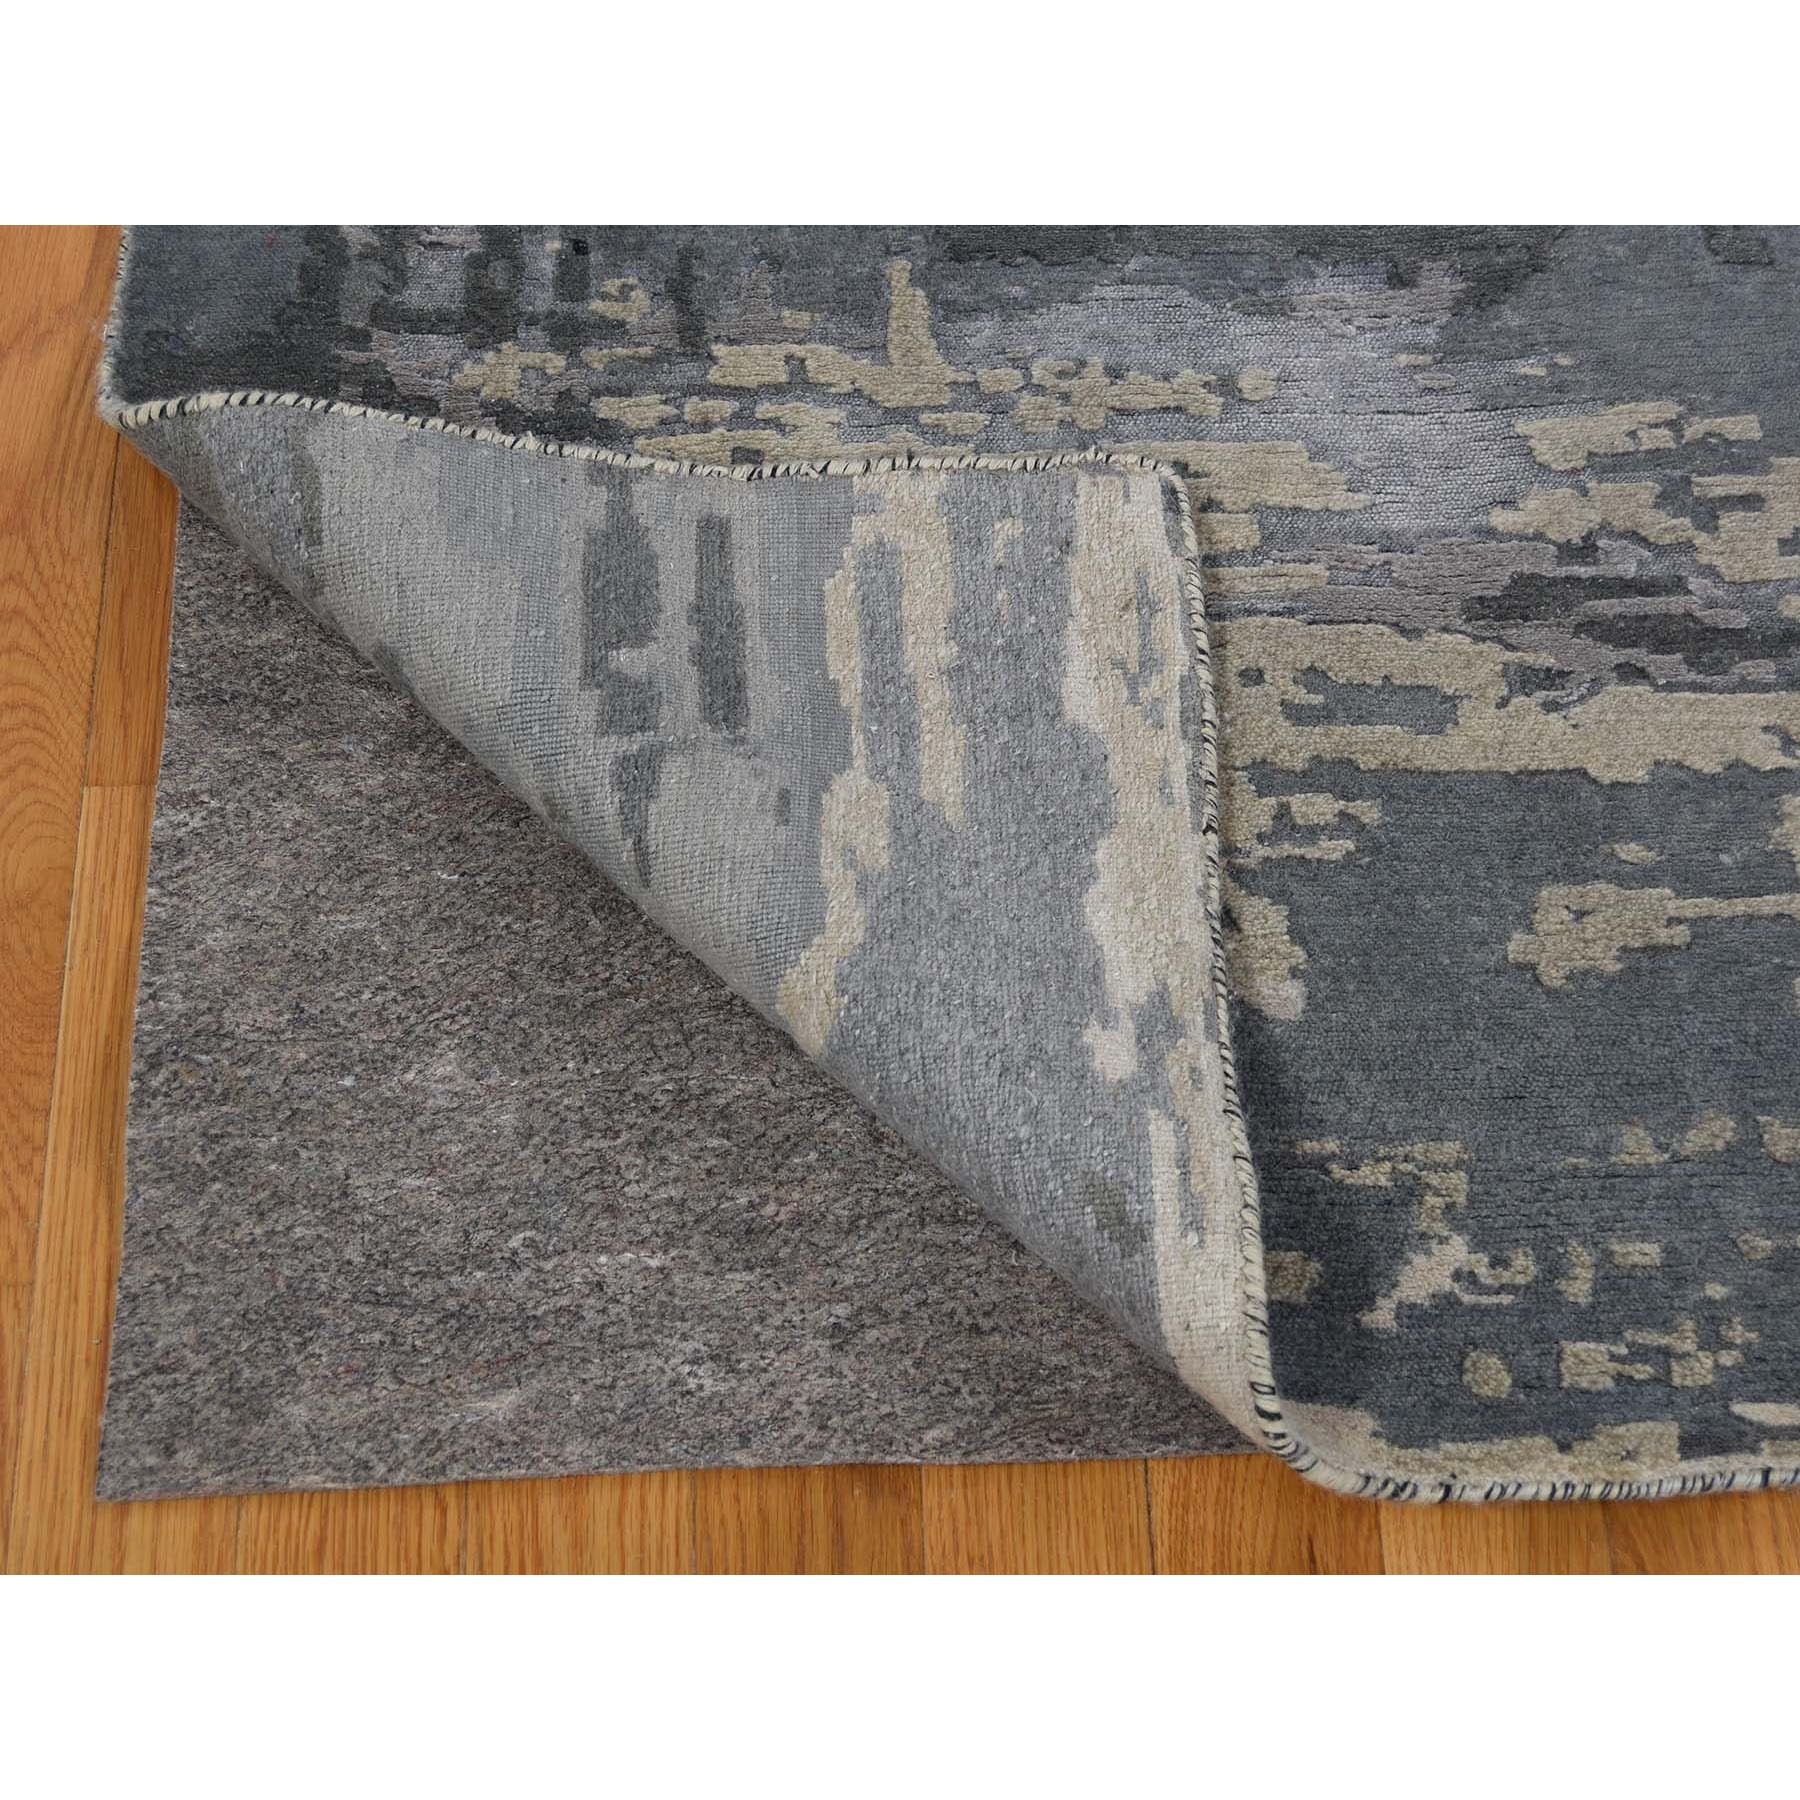 8-1 x10- Hi-Low Pile Abstract Design Wool And Silk Hand-Knotted Oriental Rug 